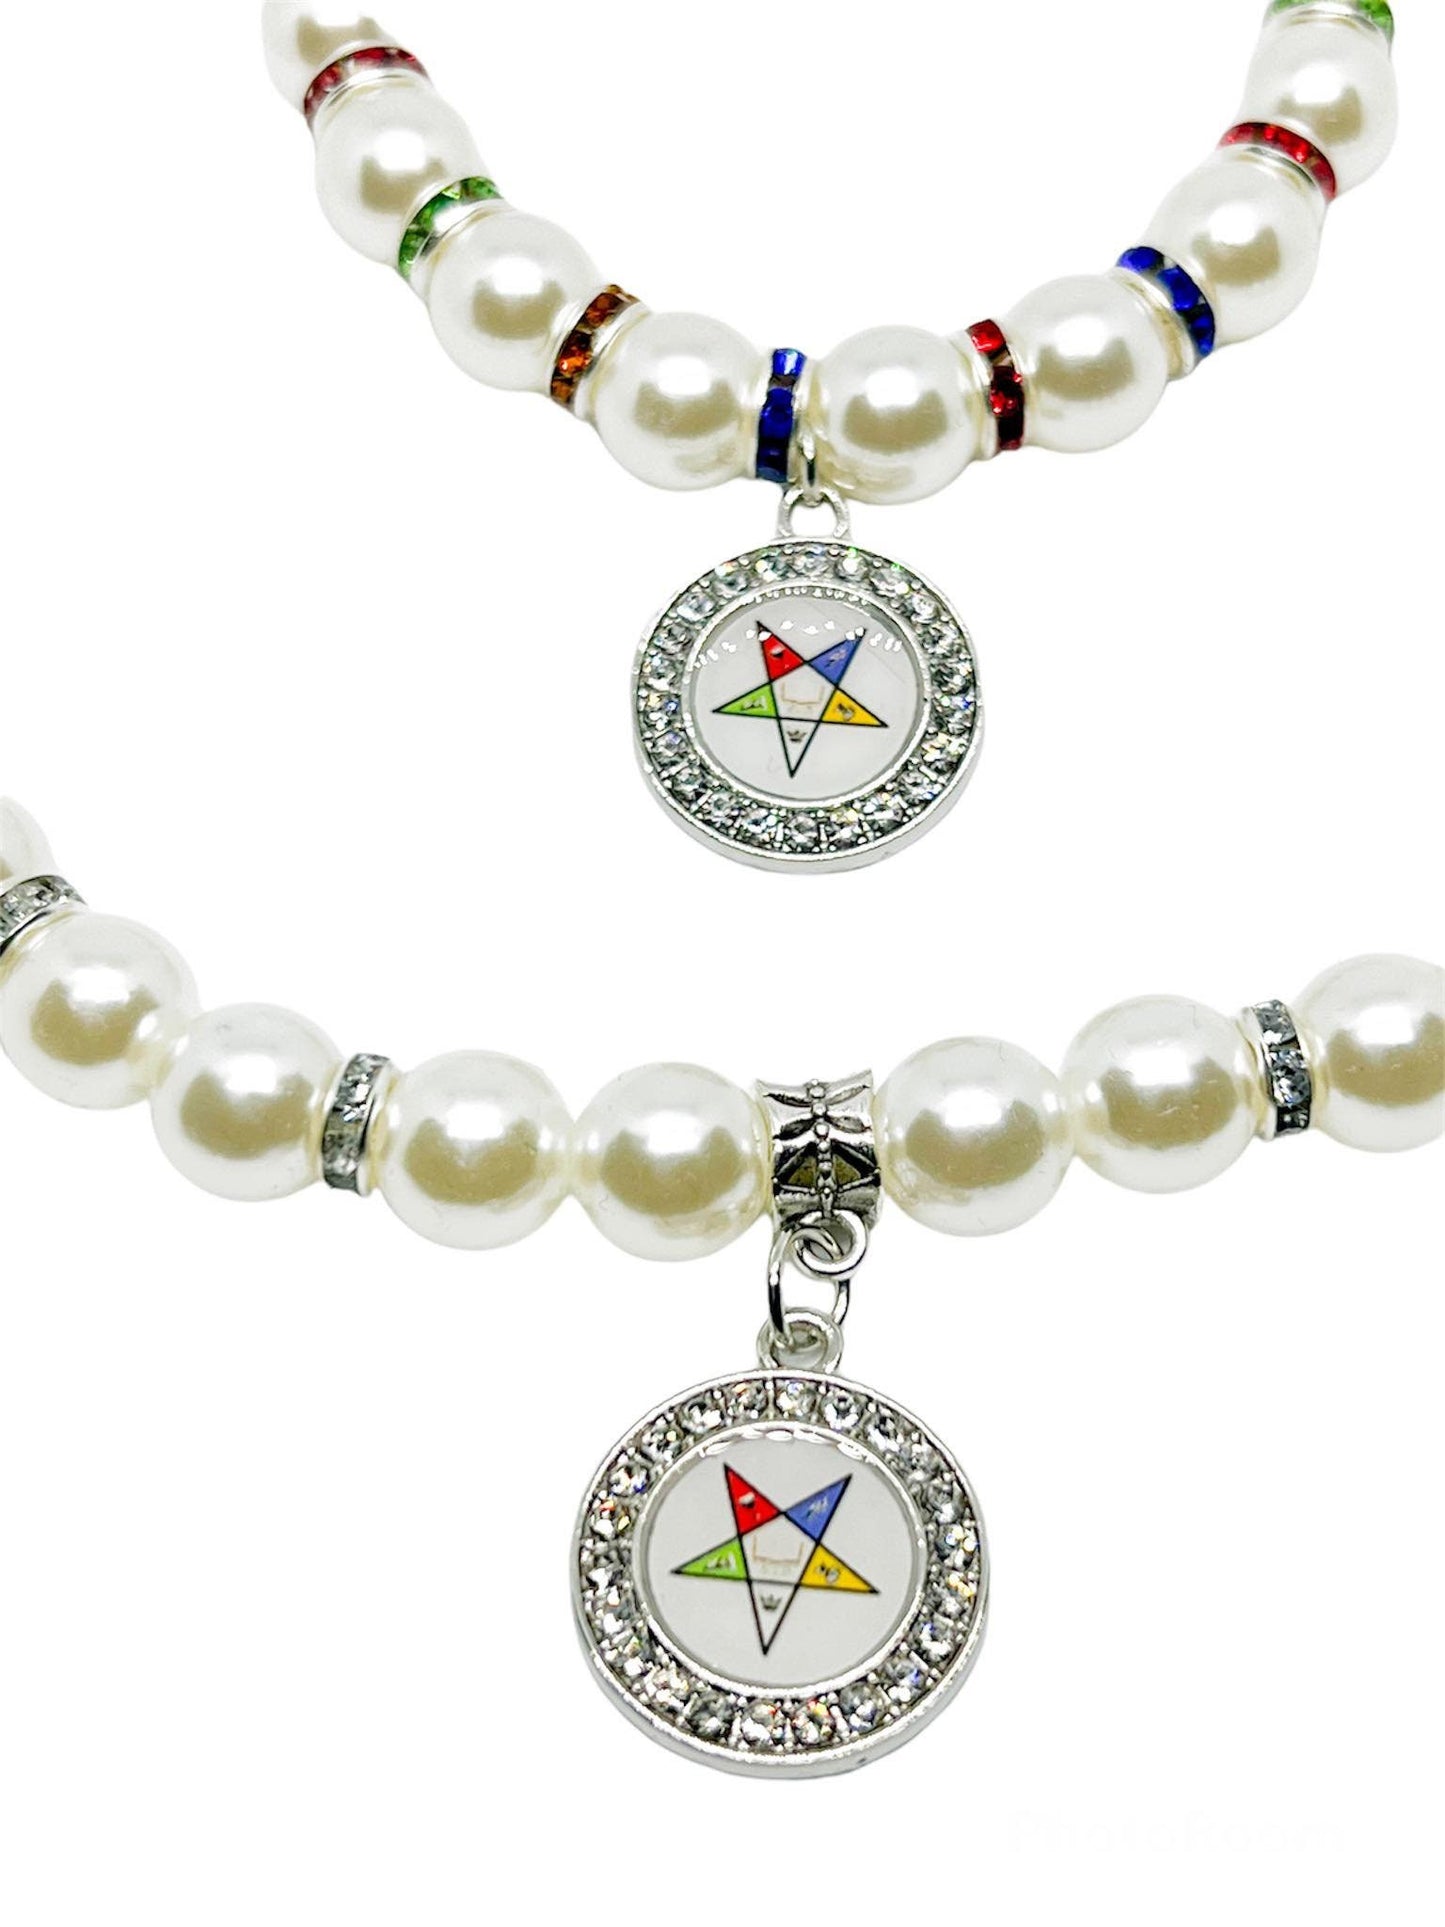 Order of Eastern Star OES White Pearl Necklace and Bracelet set